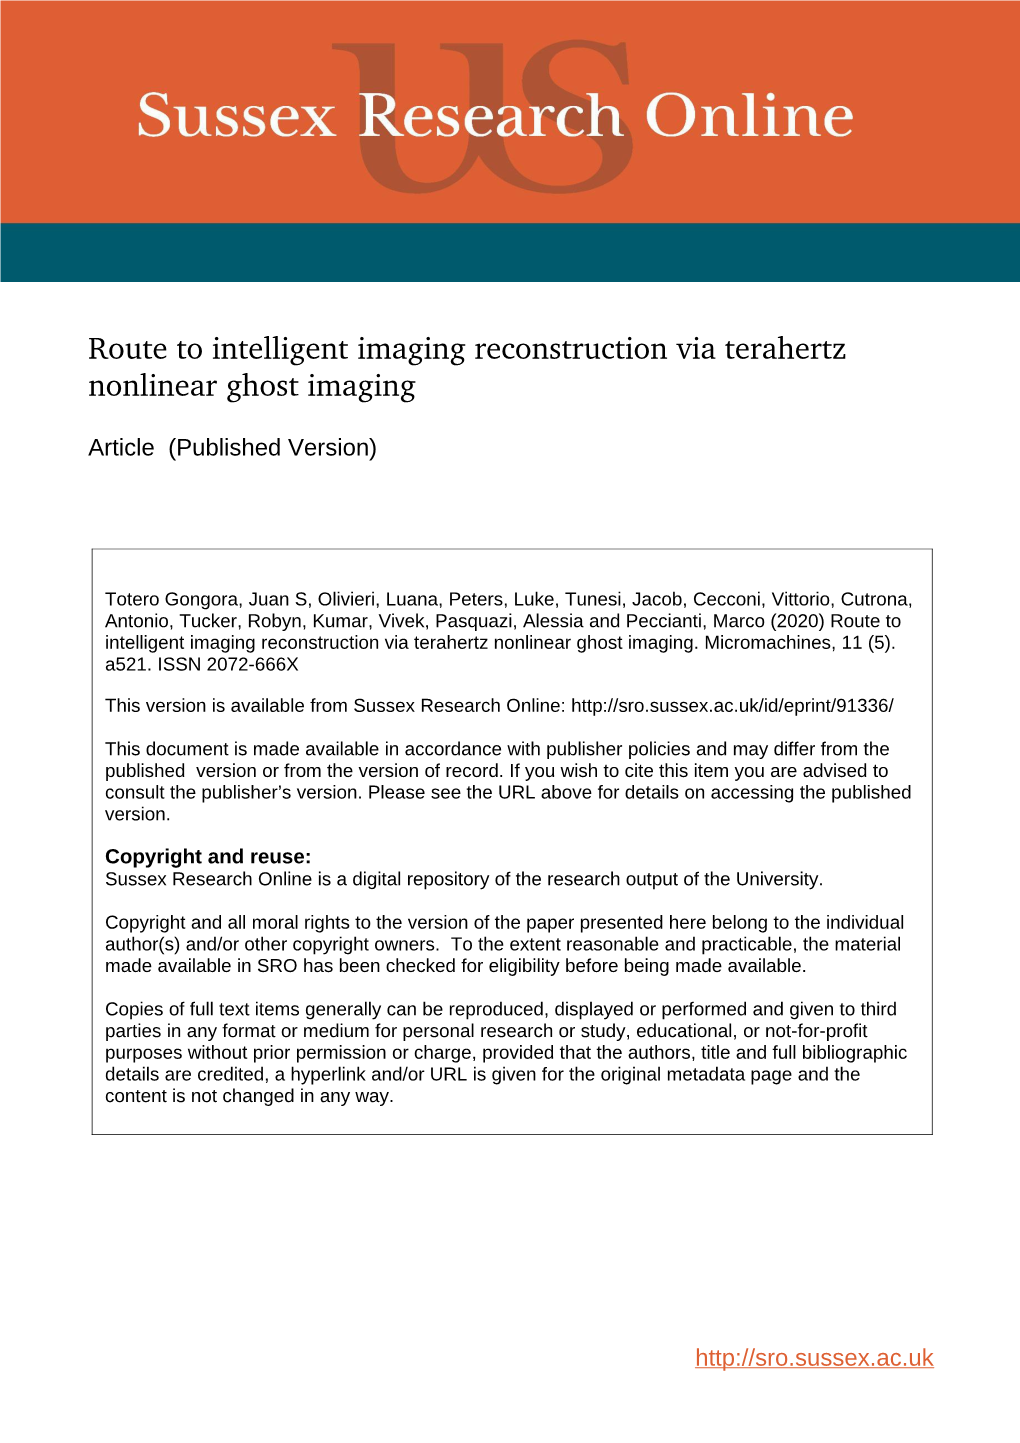 Route to Intelligent Imaging Reconstruction Via Terahertz Nonlinear Ghost Imaging